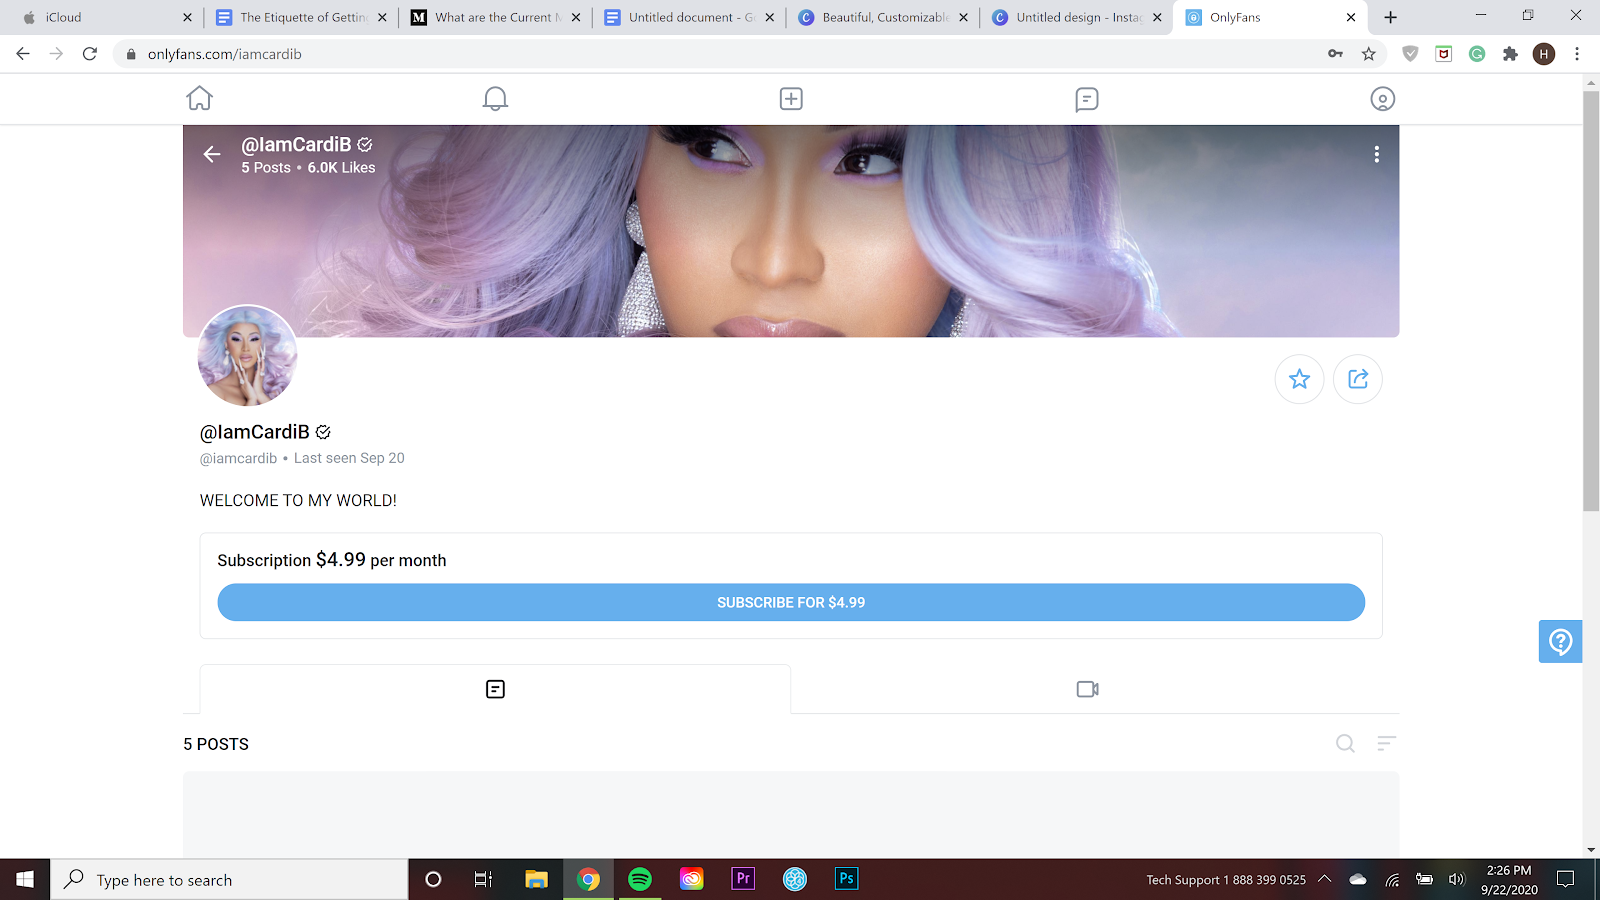 You can subscribe to Cardi B’s content for $4.99 on OnlyFans. Screenshot by author.